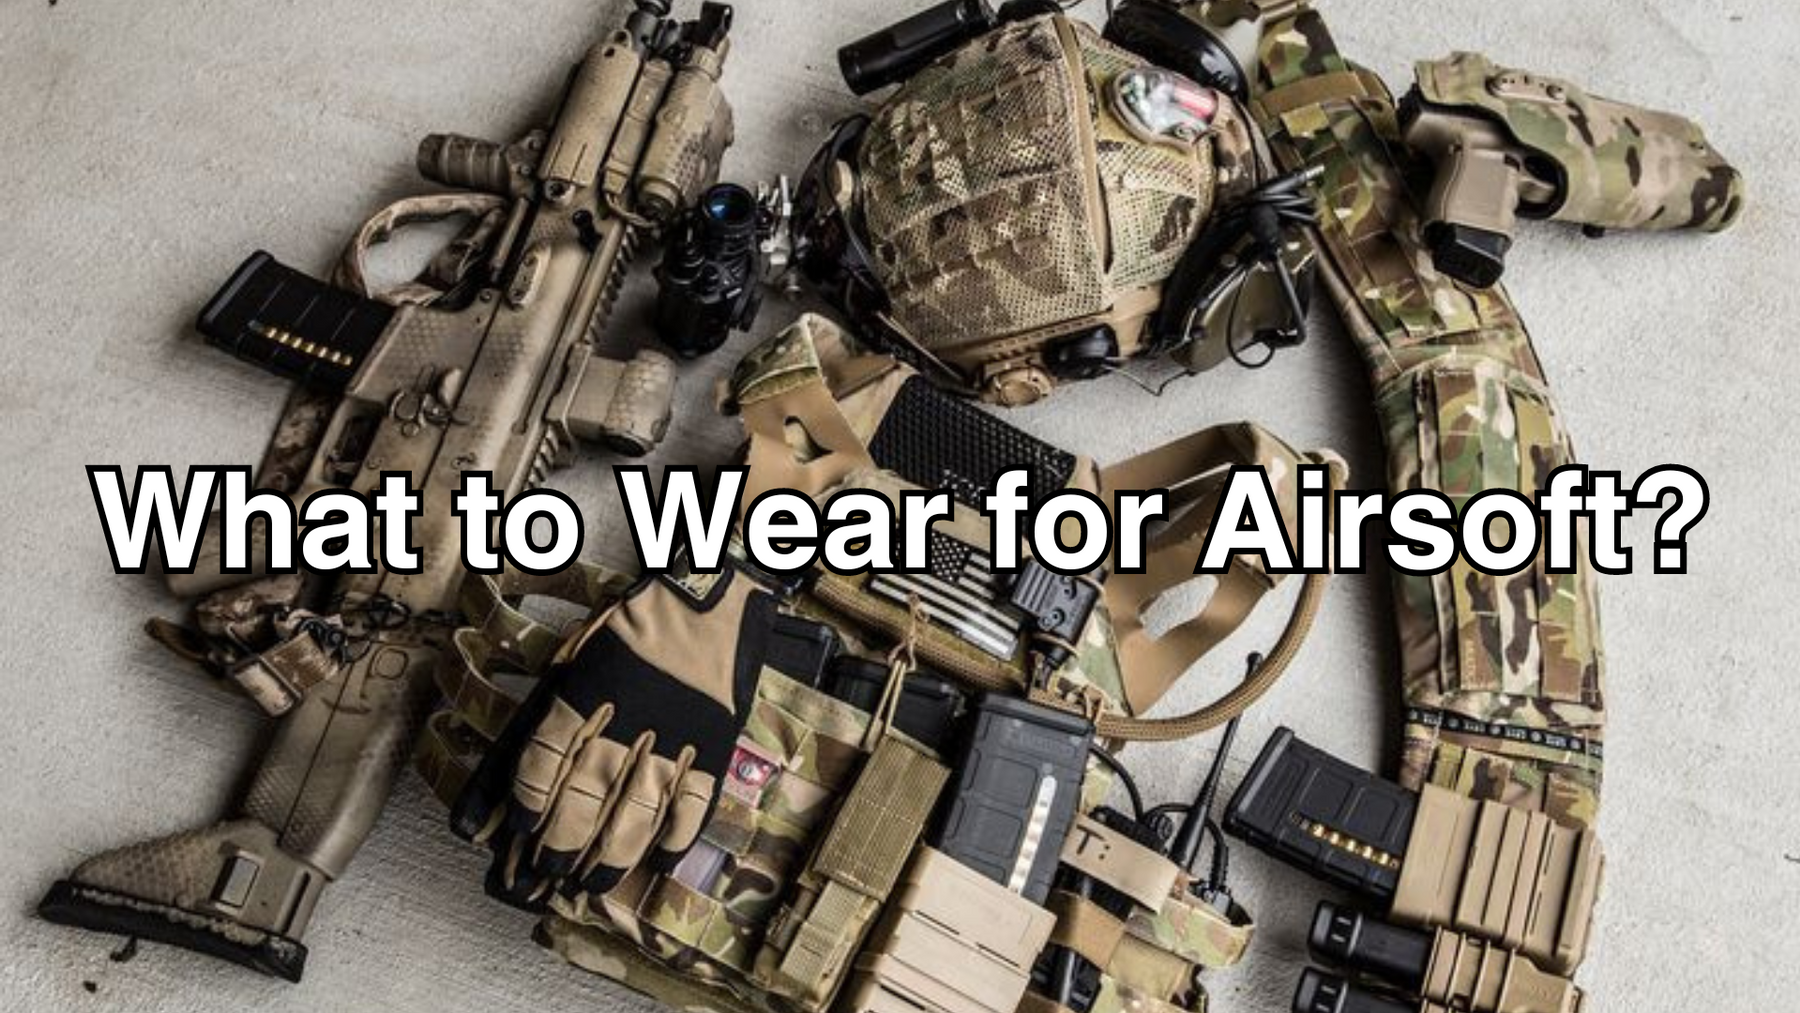 What to Wear for Airsoft?